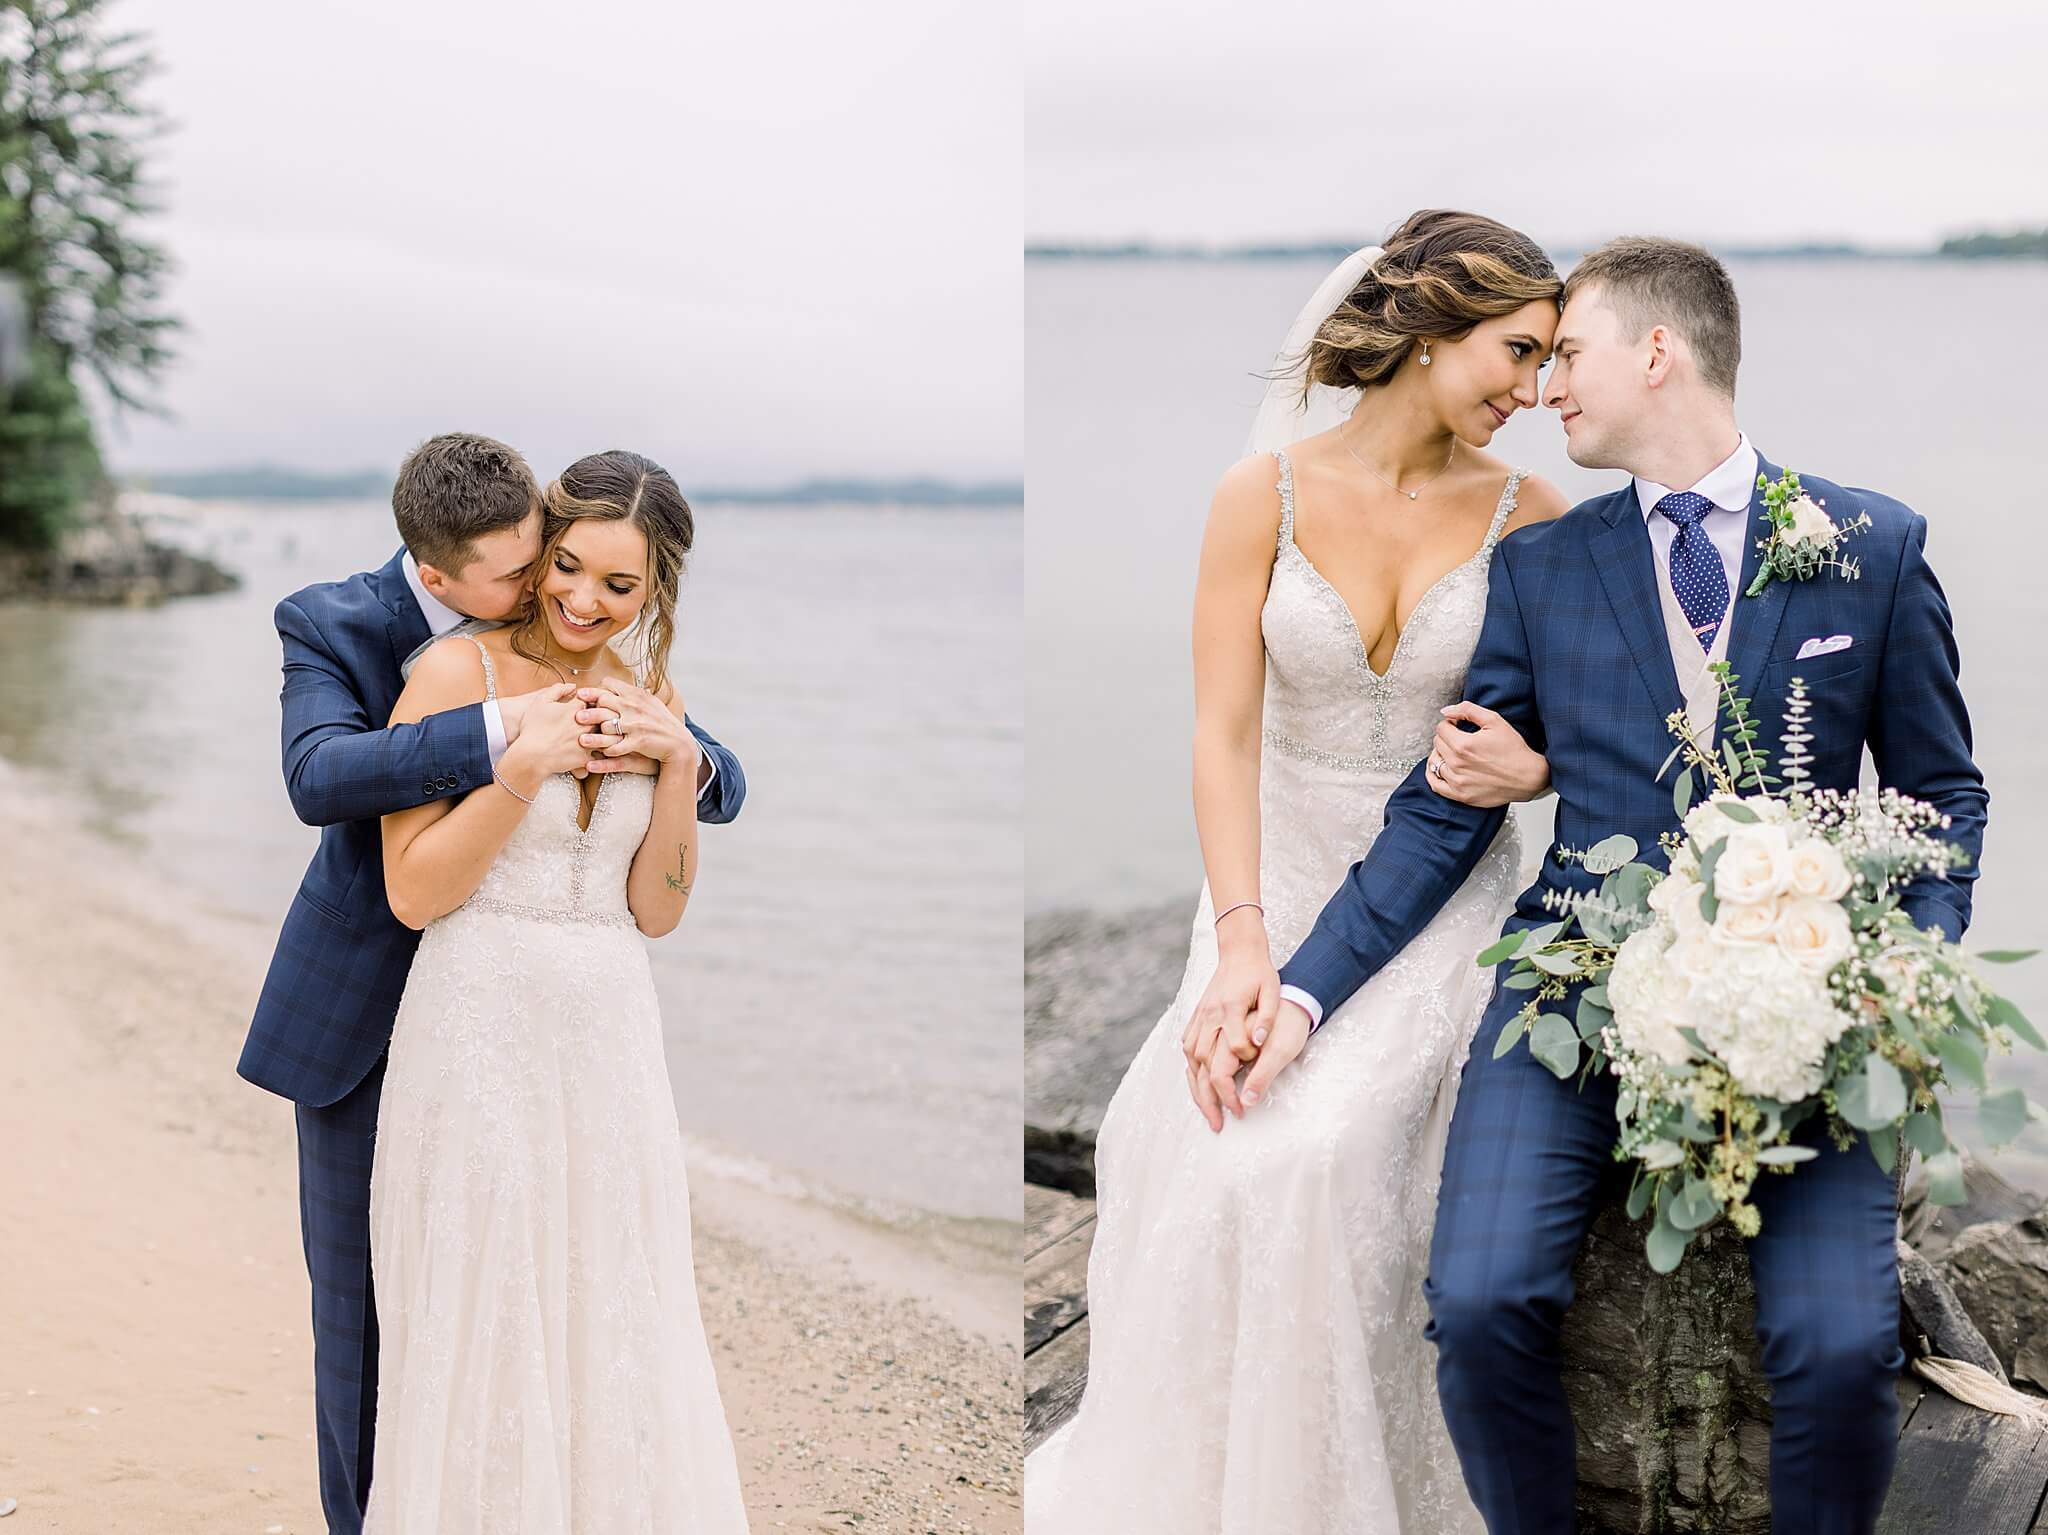 Bride and groom snuggle on beach during Intimate Northern Michigan Wedding day pictures.